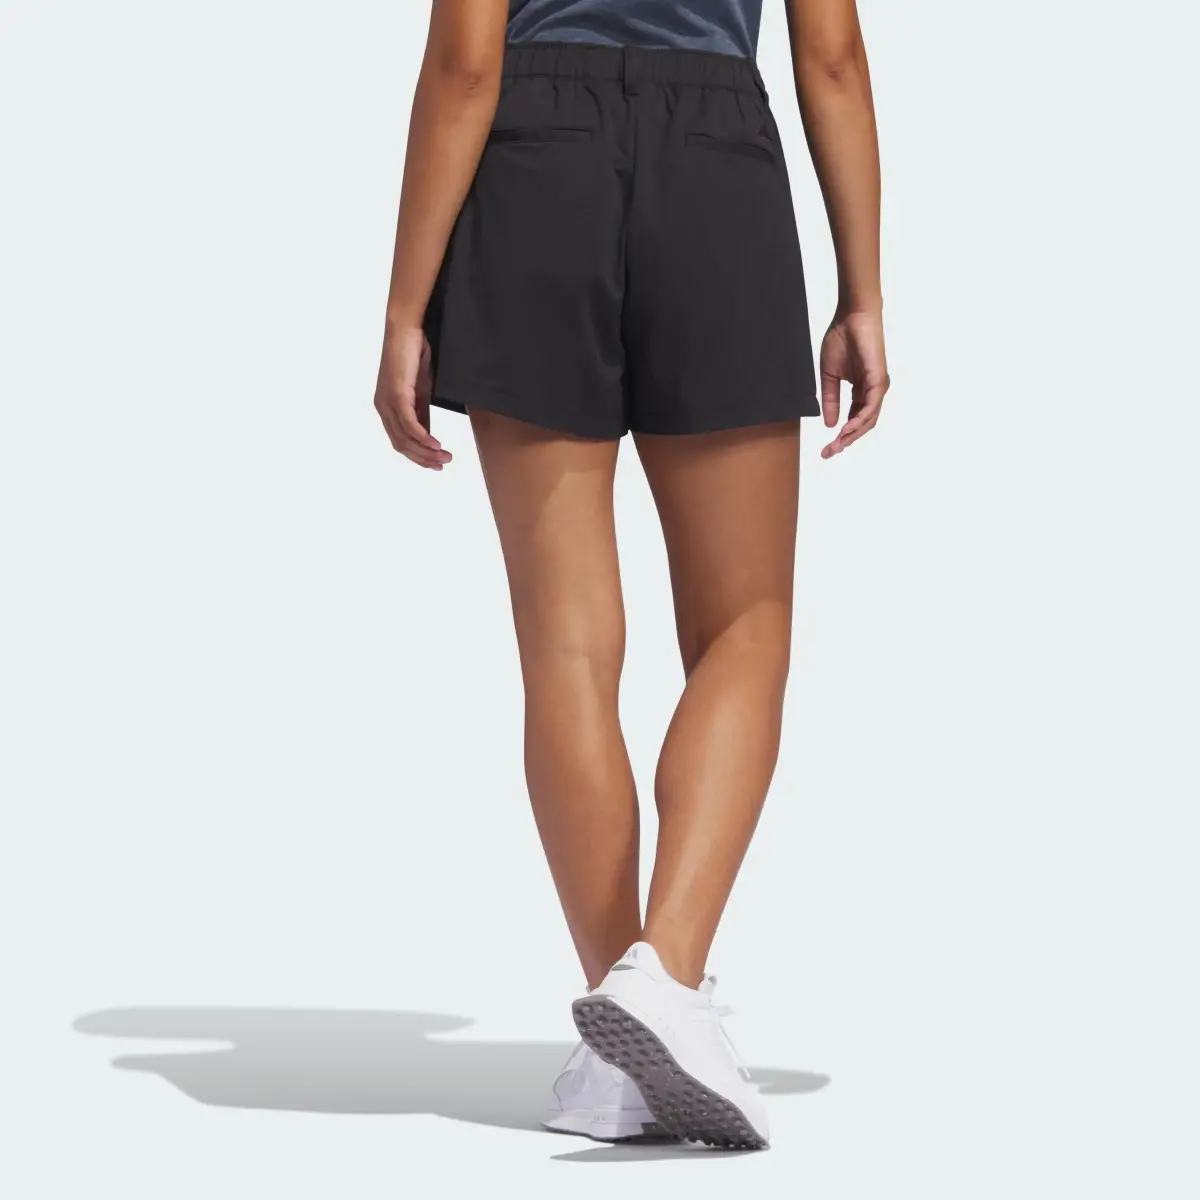 Adidas Short Go-To Pleated. 2